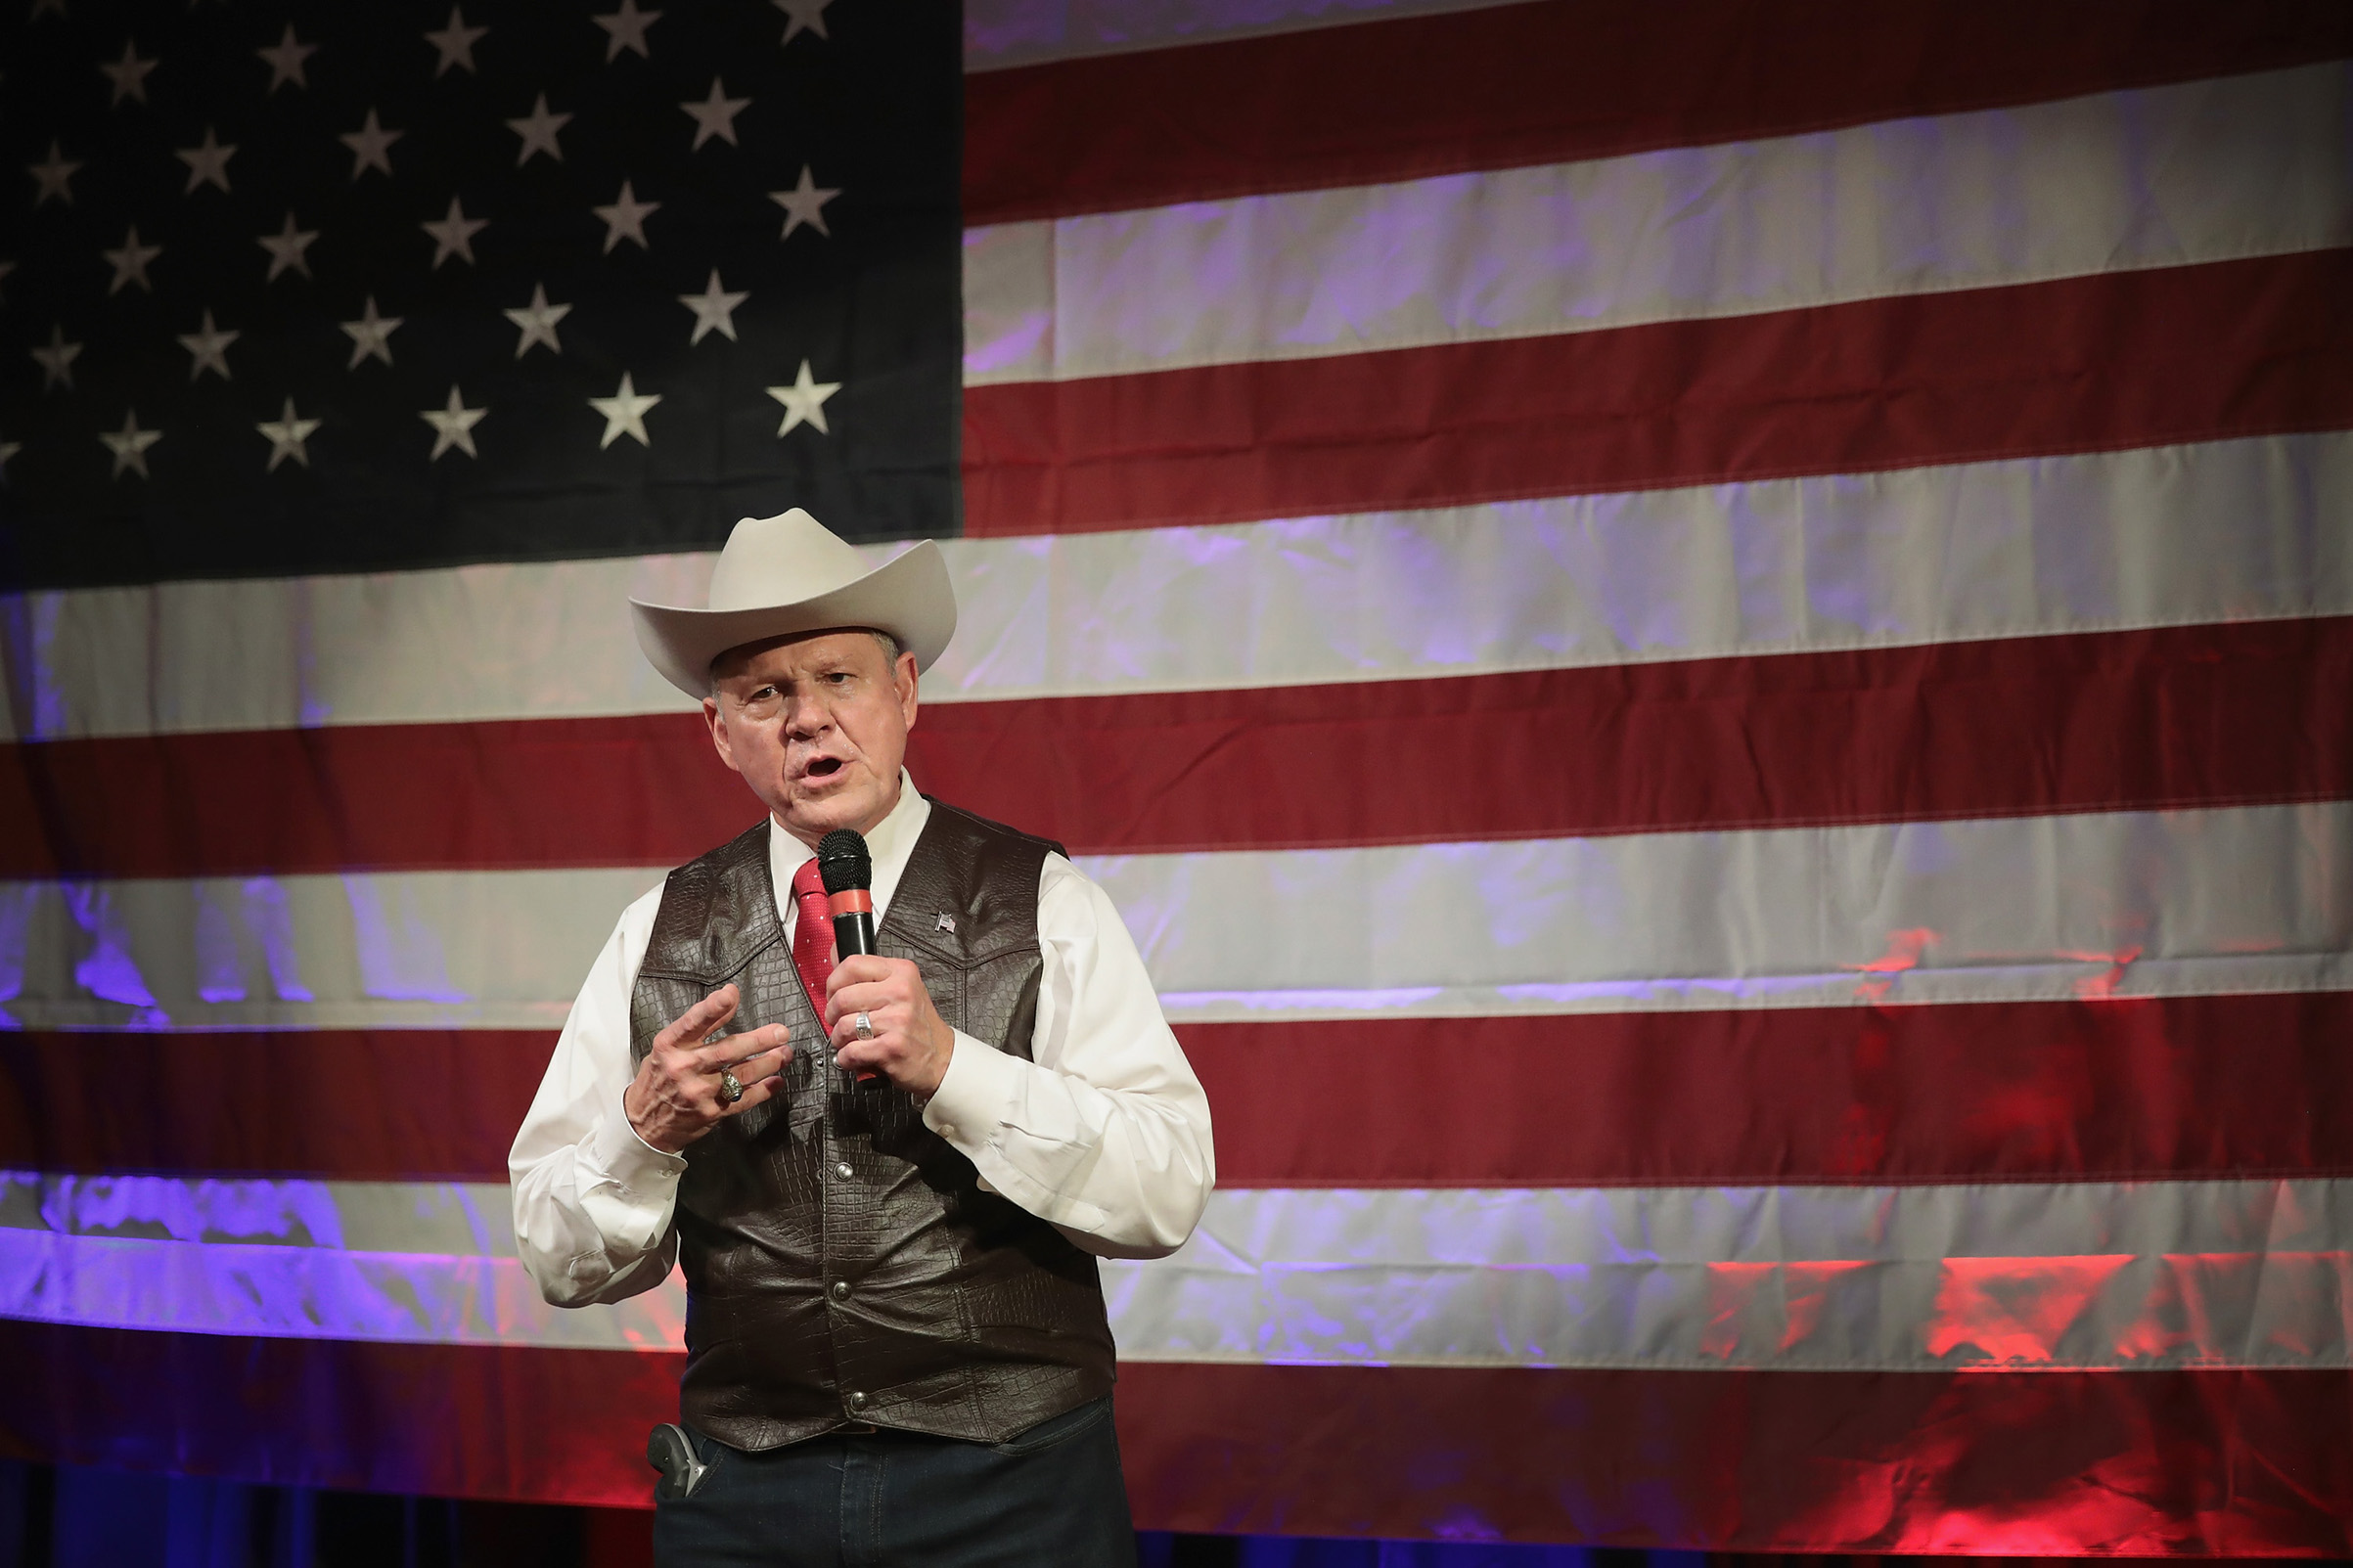 Republican candidate for the U.S. Senate in Alabama, Roy Moore, speaks at a campaign rally on Sept. 25, 2017. (Scott Olson—Getty Images)